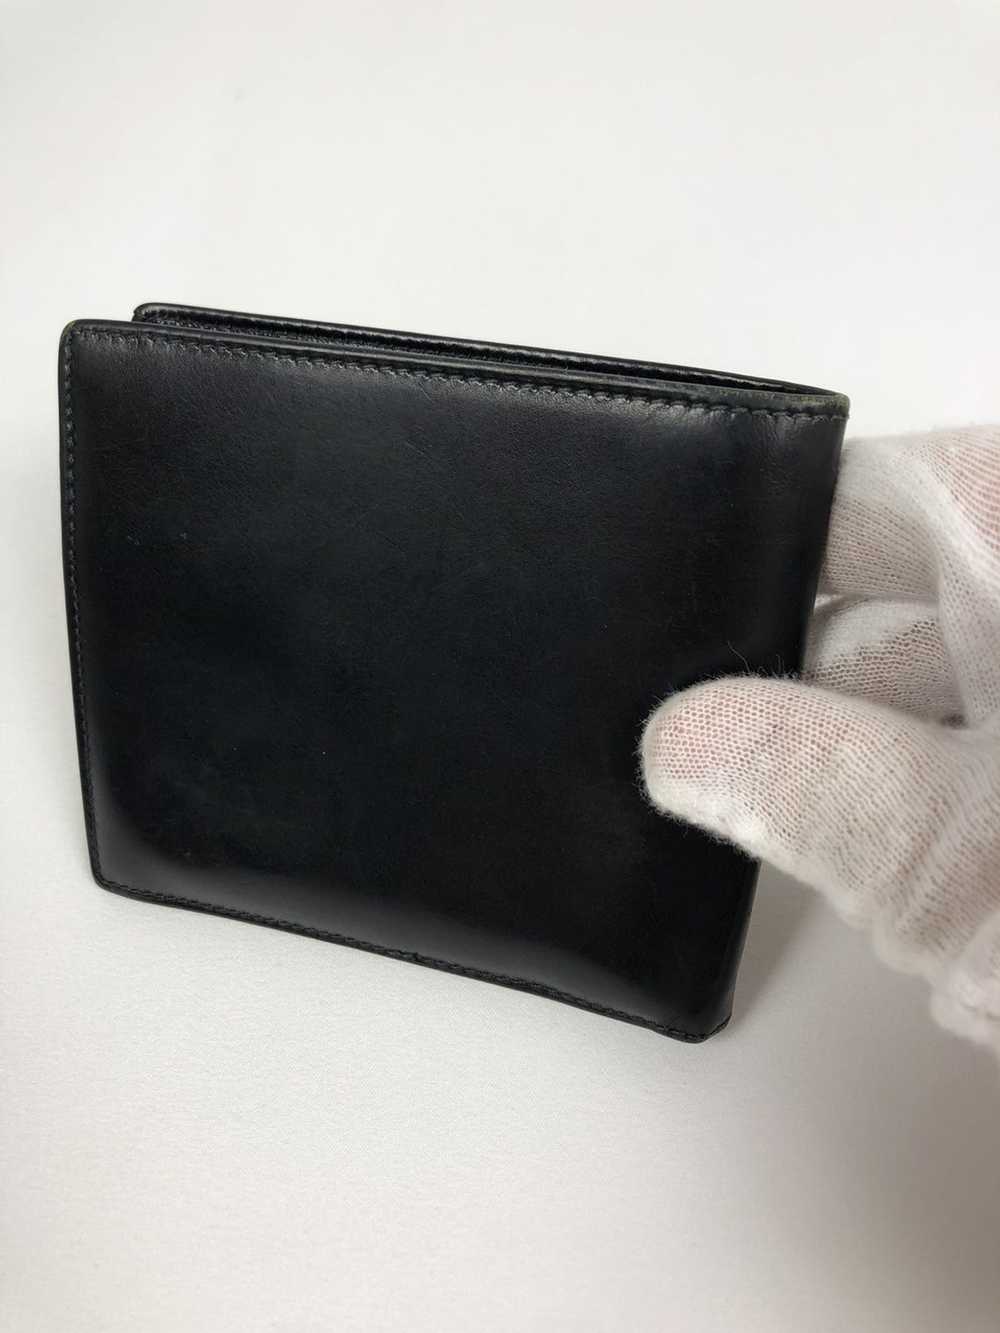 Gucci Gucci G leather bifold wallet - image 3